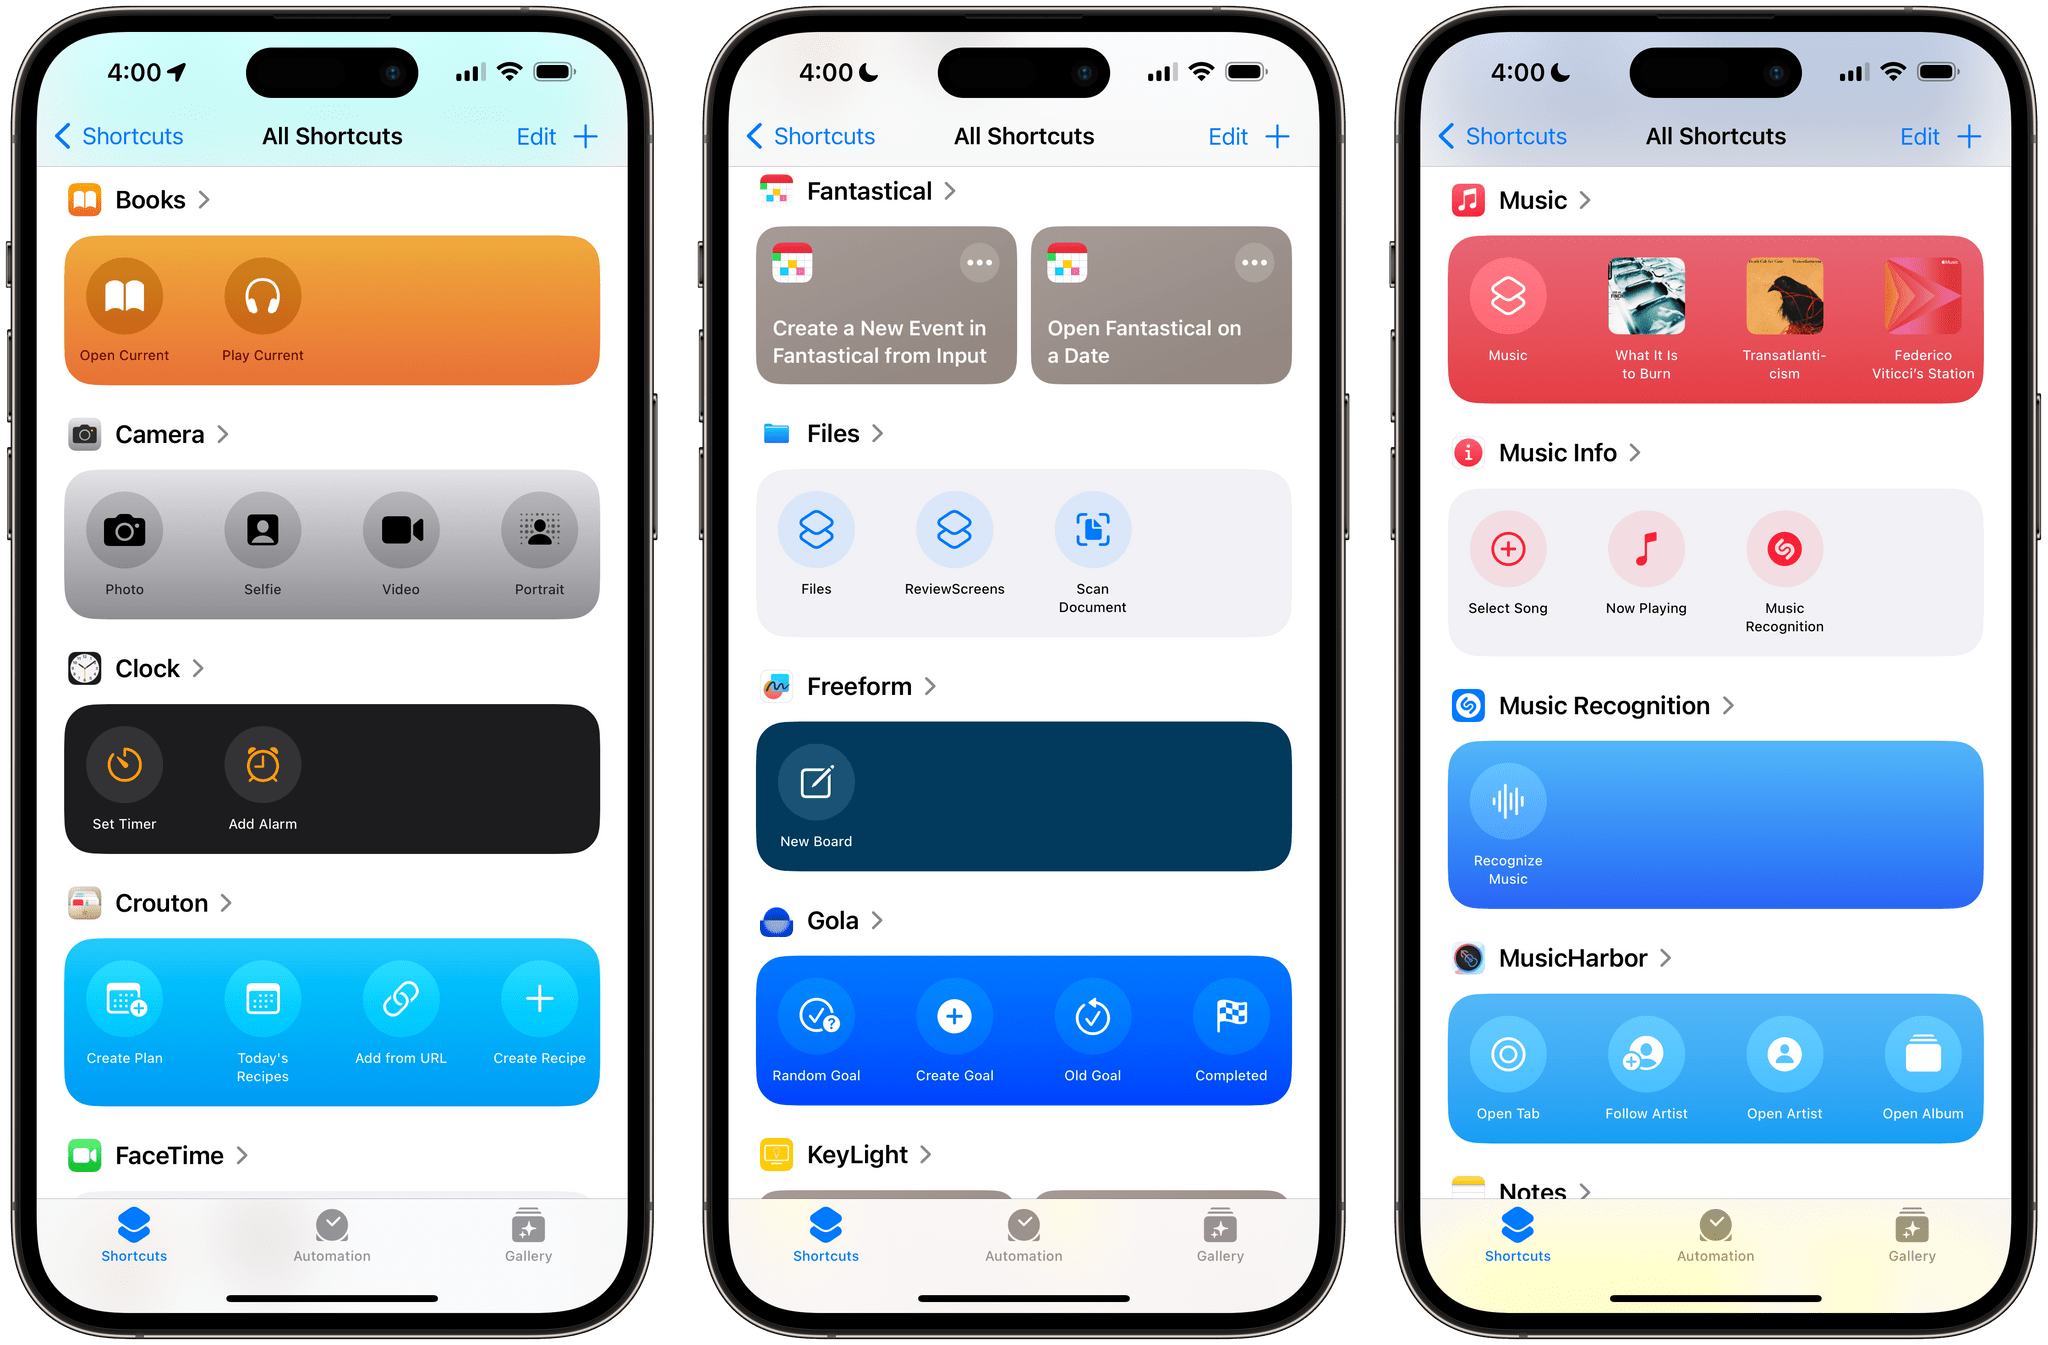 The same App Shortcuts have a new look in the Shortcuts app. Fantastical, which hadn't been updated for iOS 17 when I captured this image, was still using the old style of App Shortcuts (center).